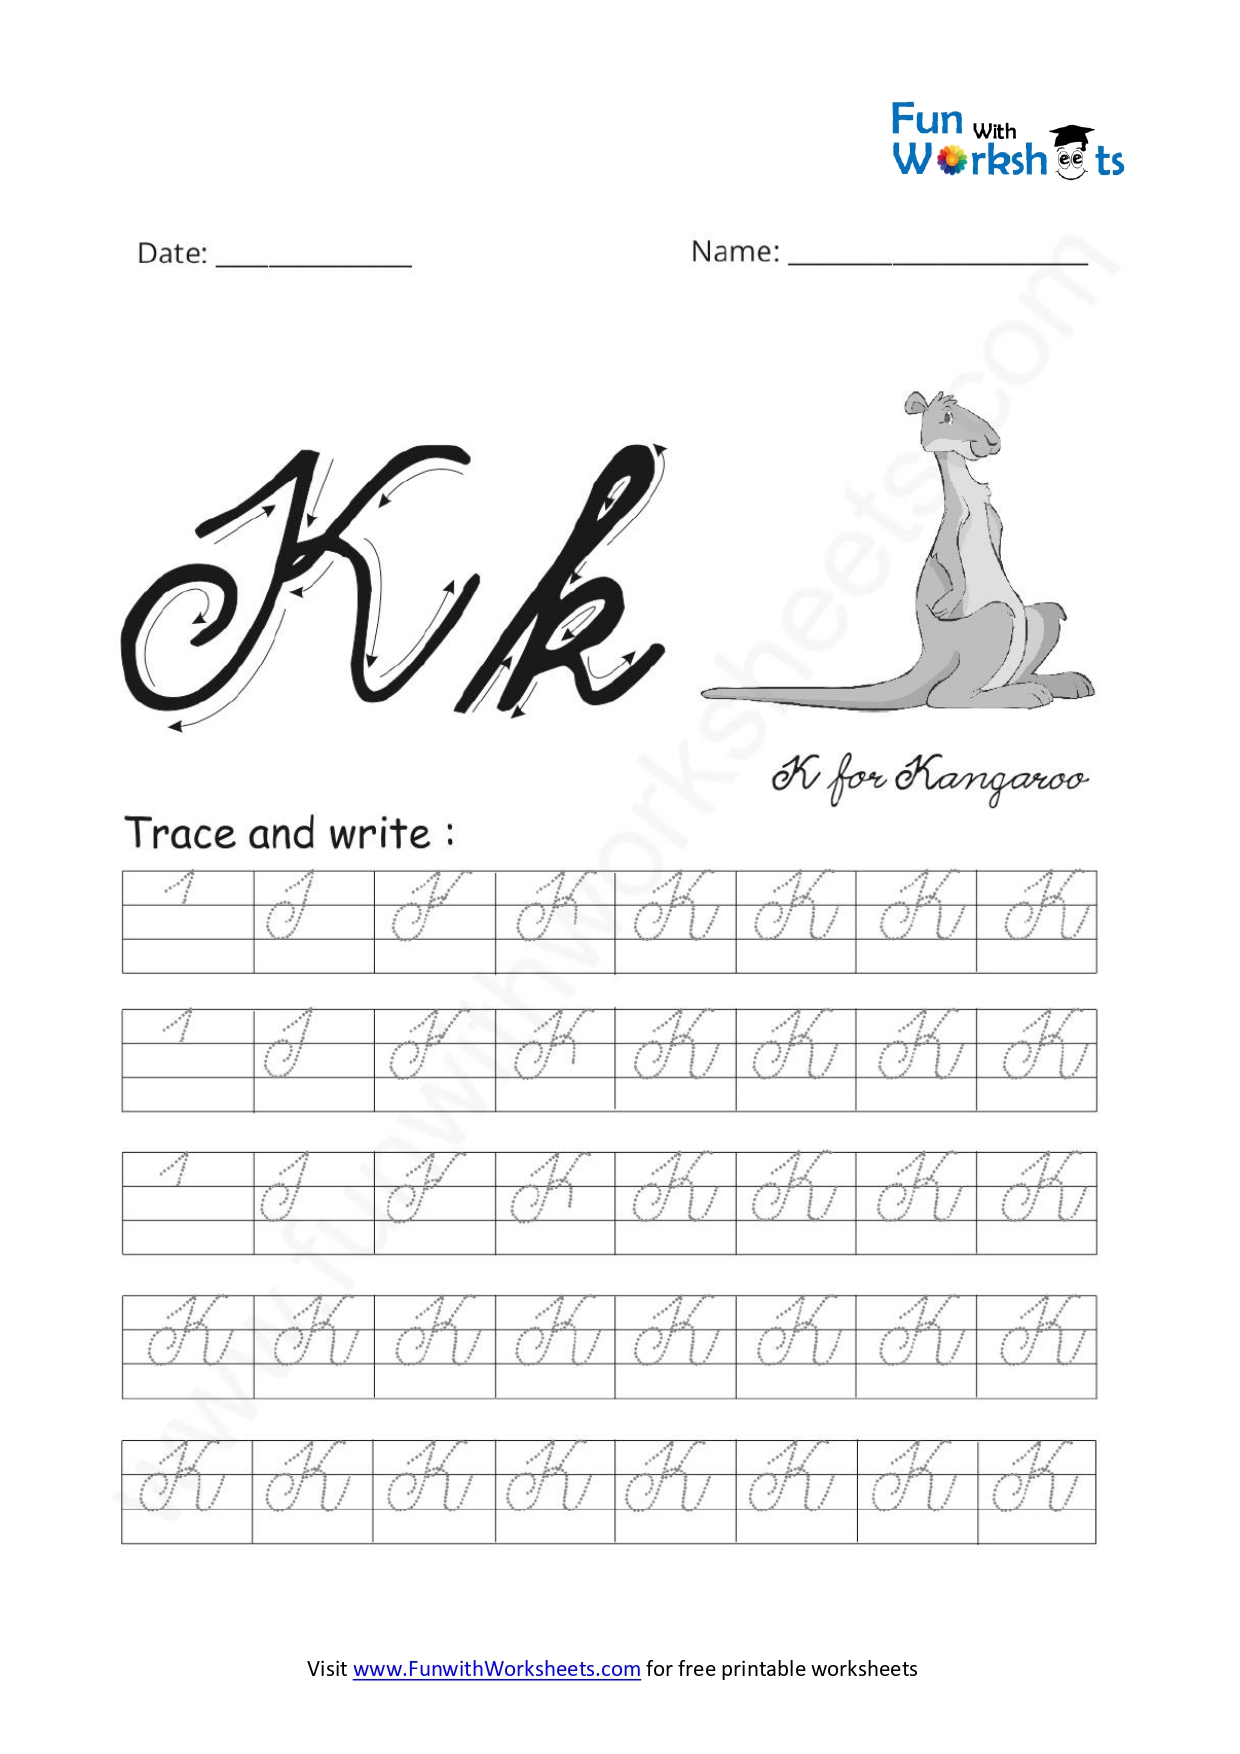 practice-your-russian-cursive-writing-with-this-free-russian-cursive-alphabet-practice-sheets